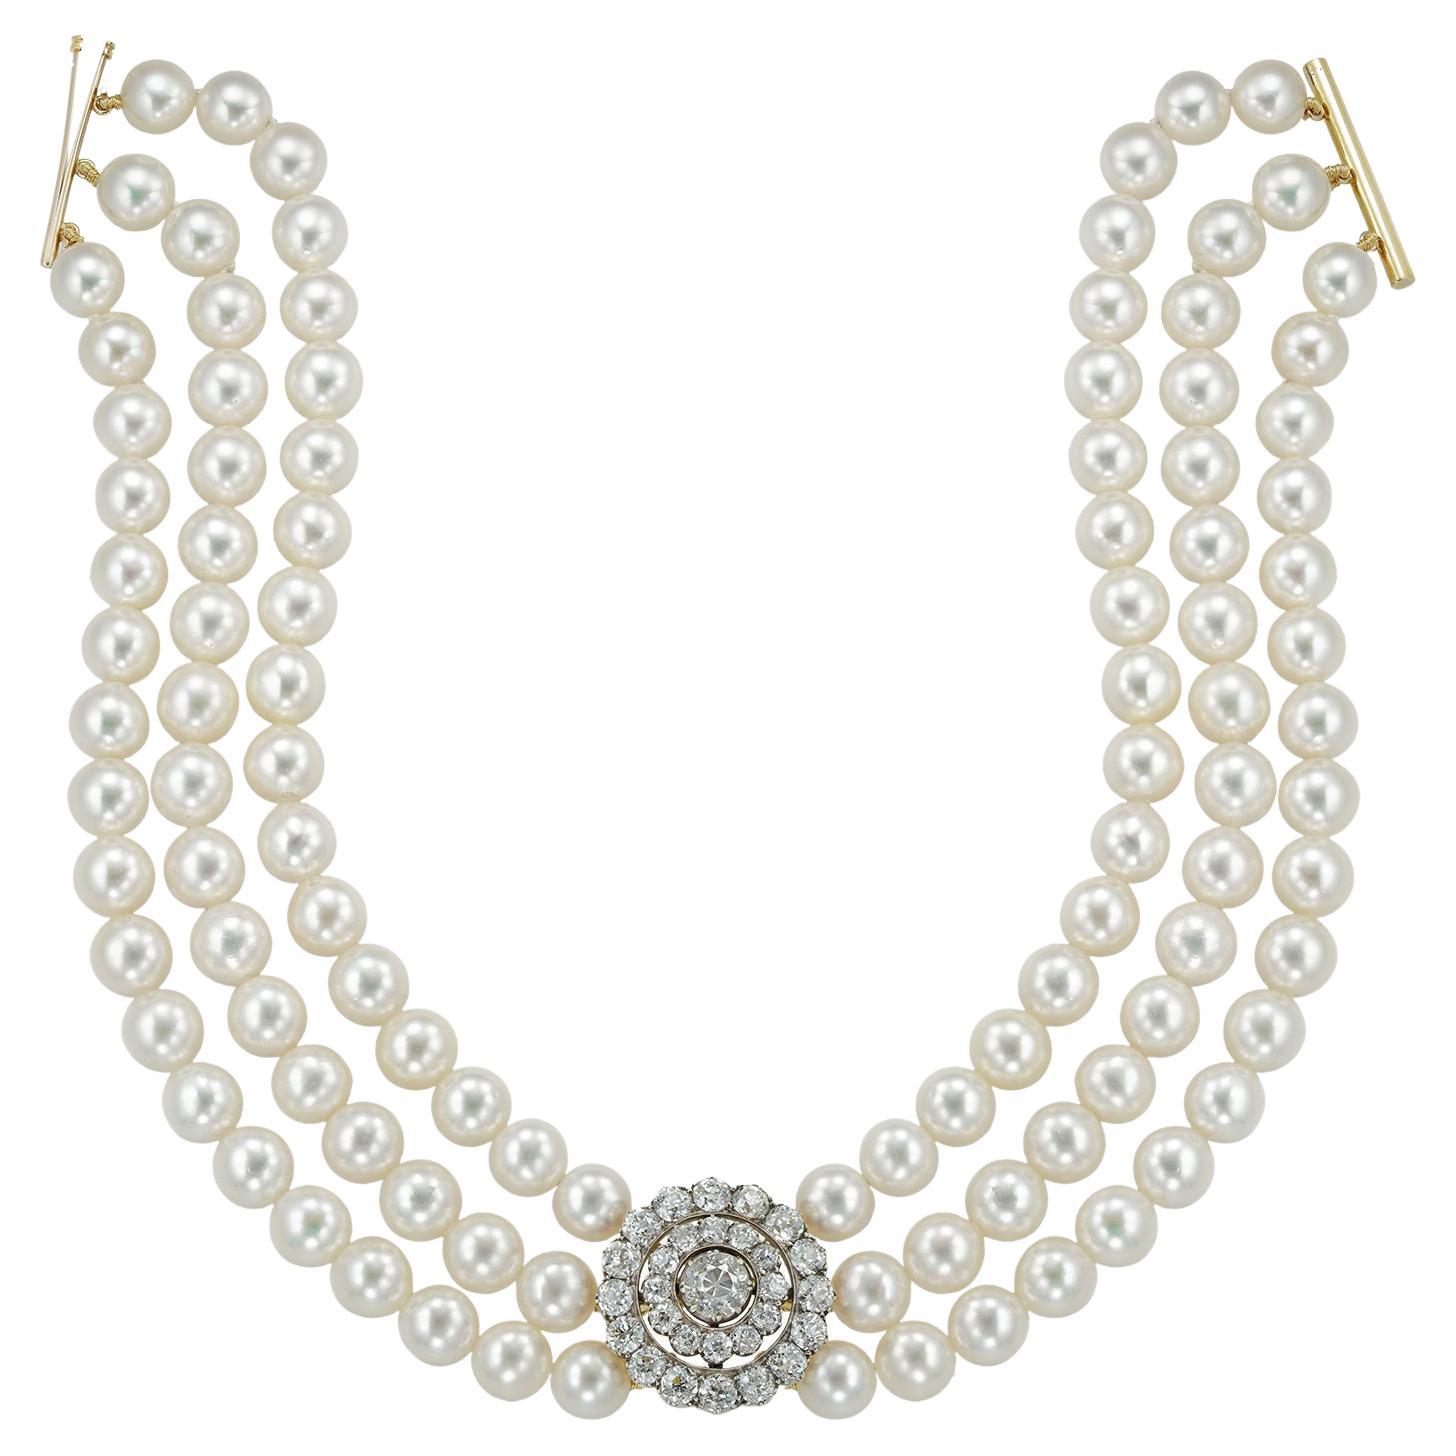 Diamond and Cultured Pearl Necklace